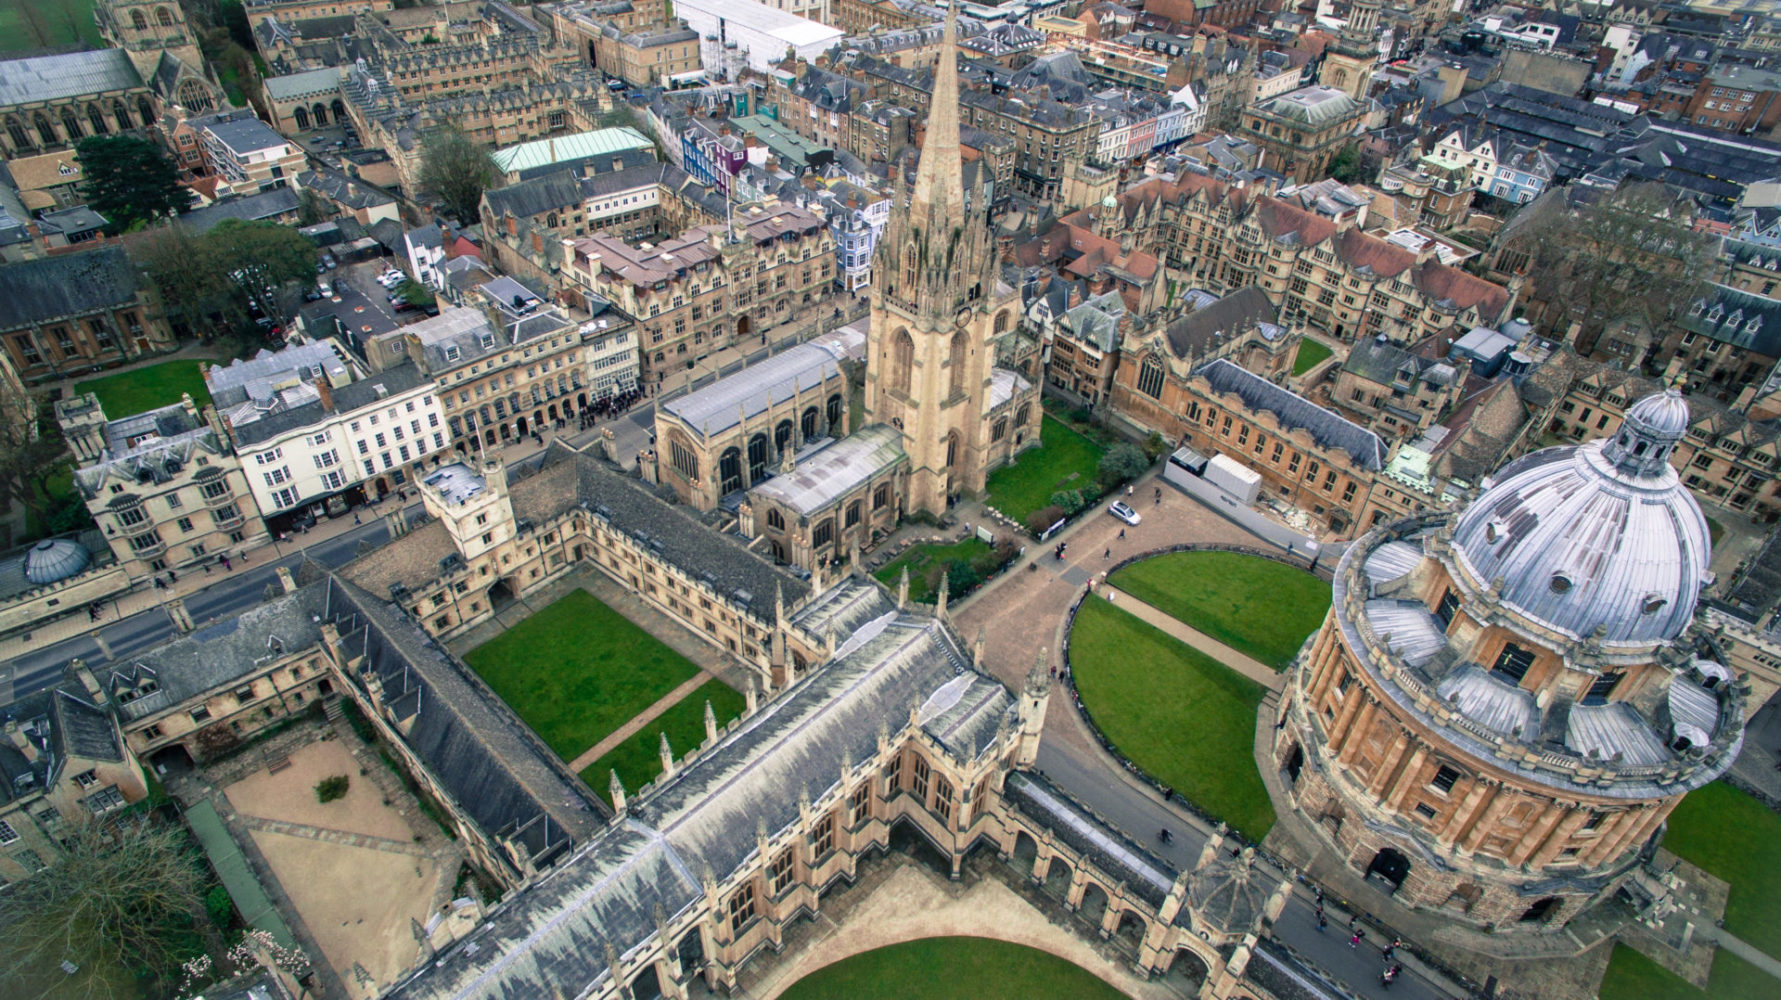 Bird's view of the historic city of Oxford